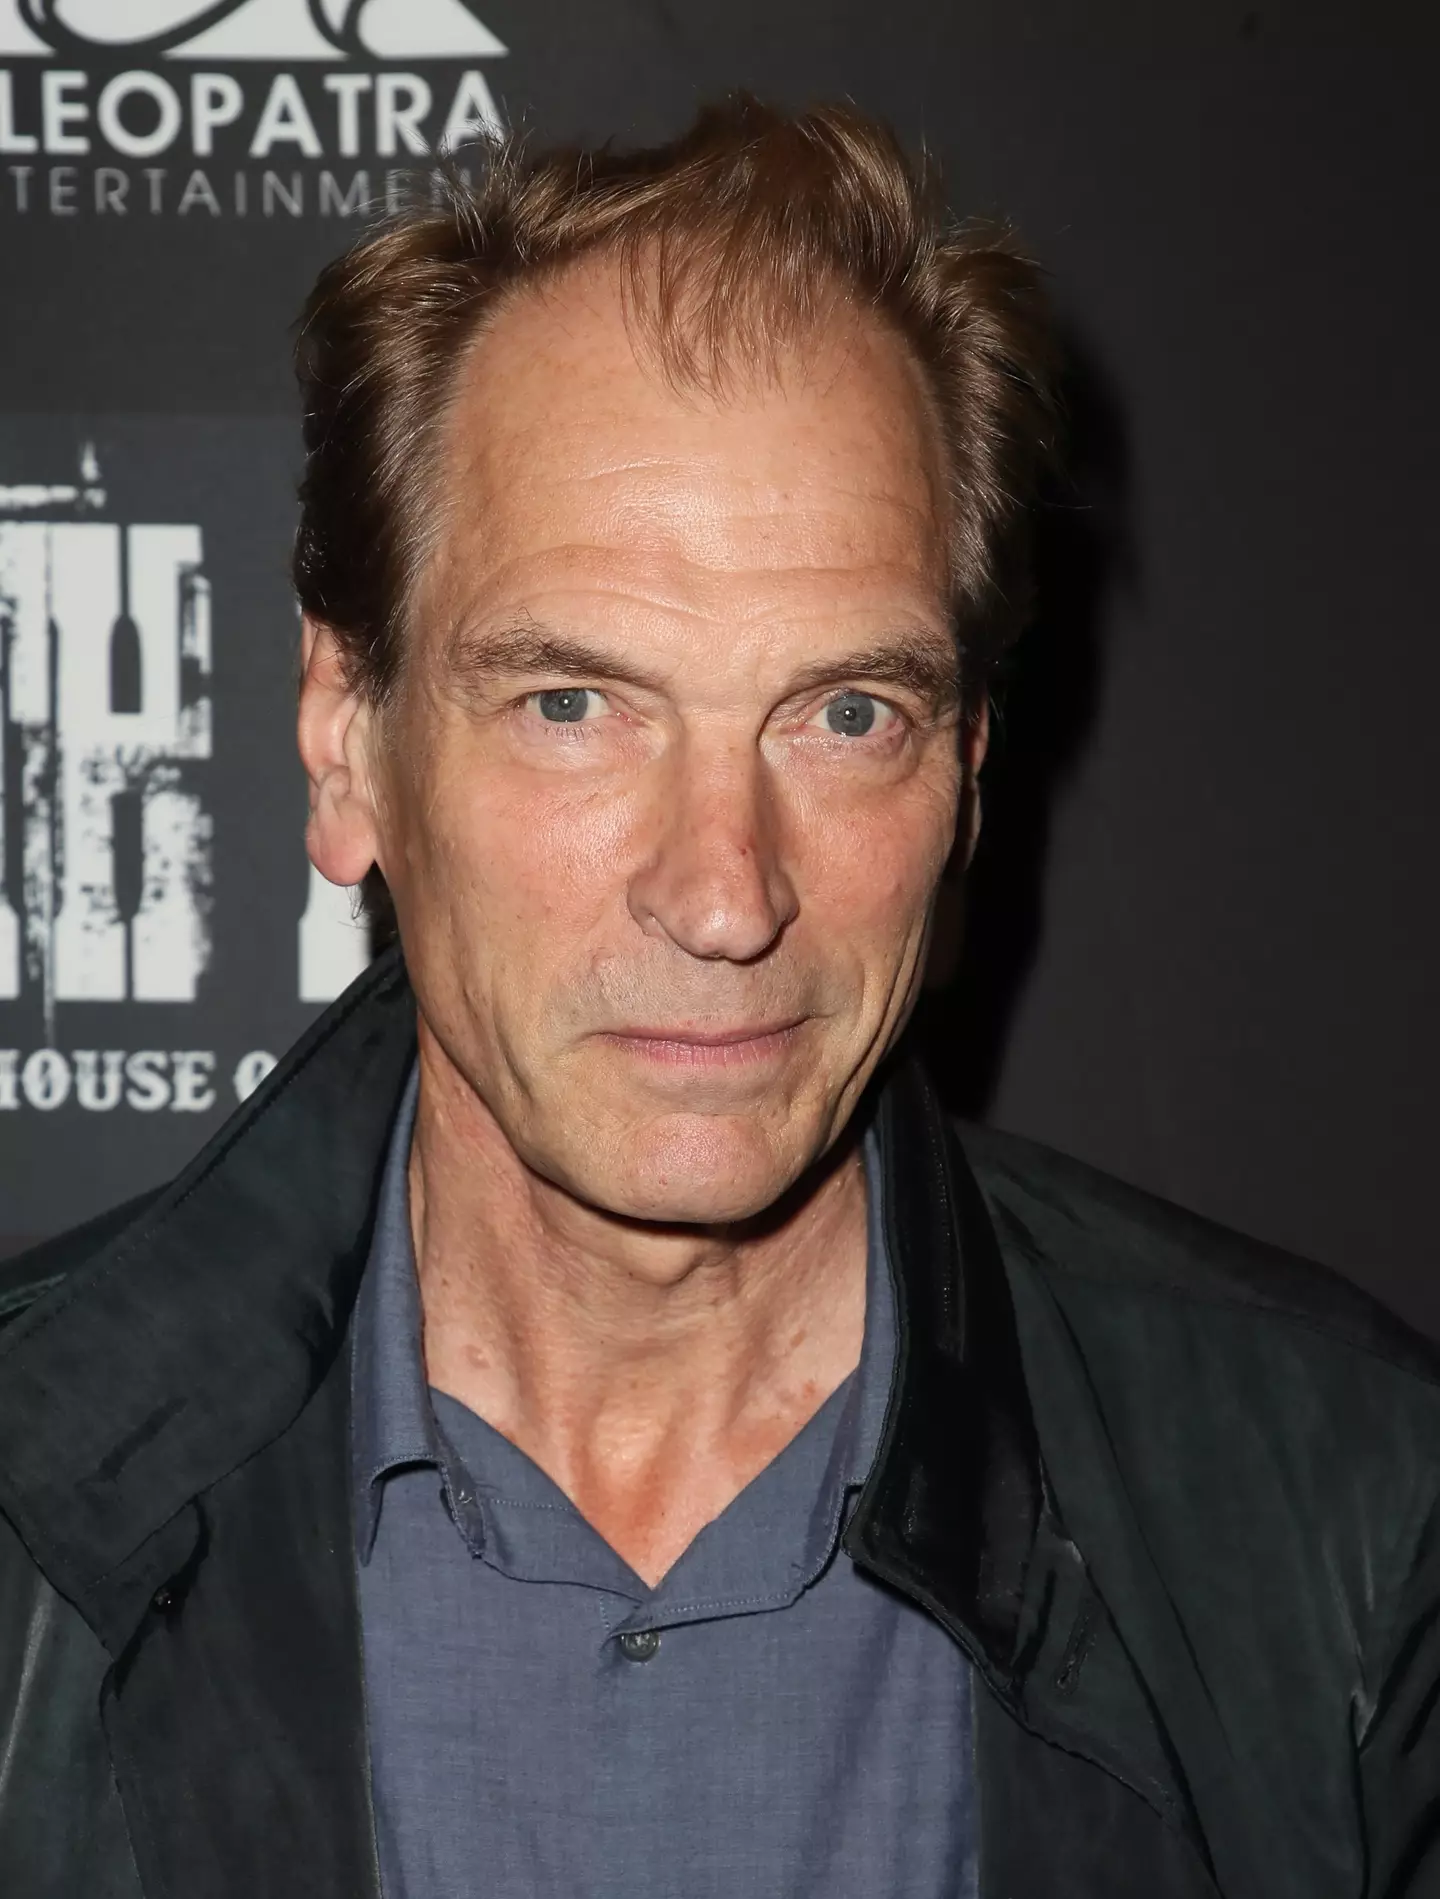 The hikers who found Julian Sands' remains have opened up about the discovery.